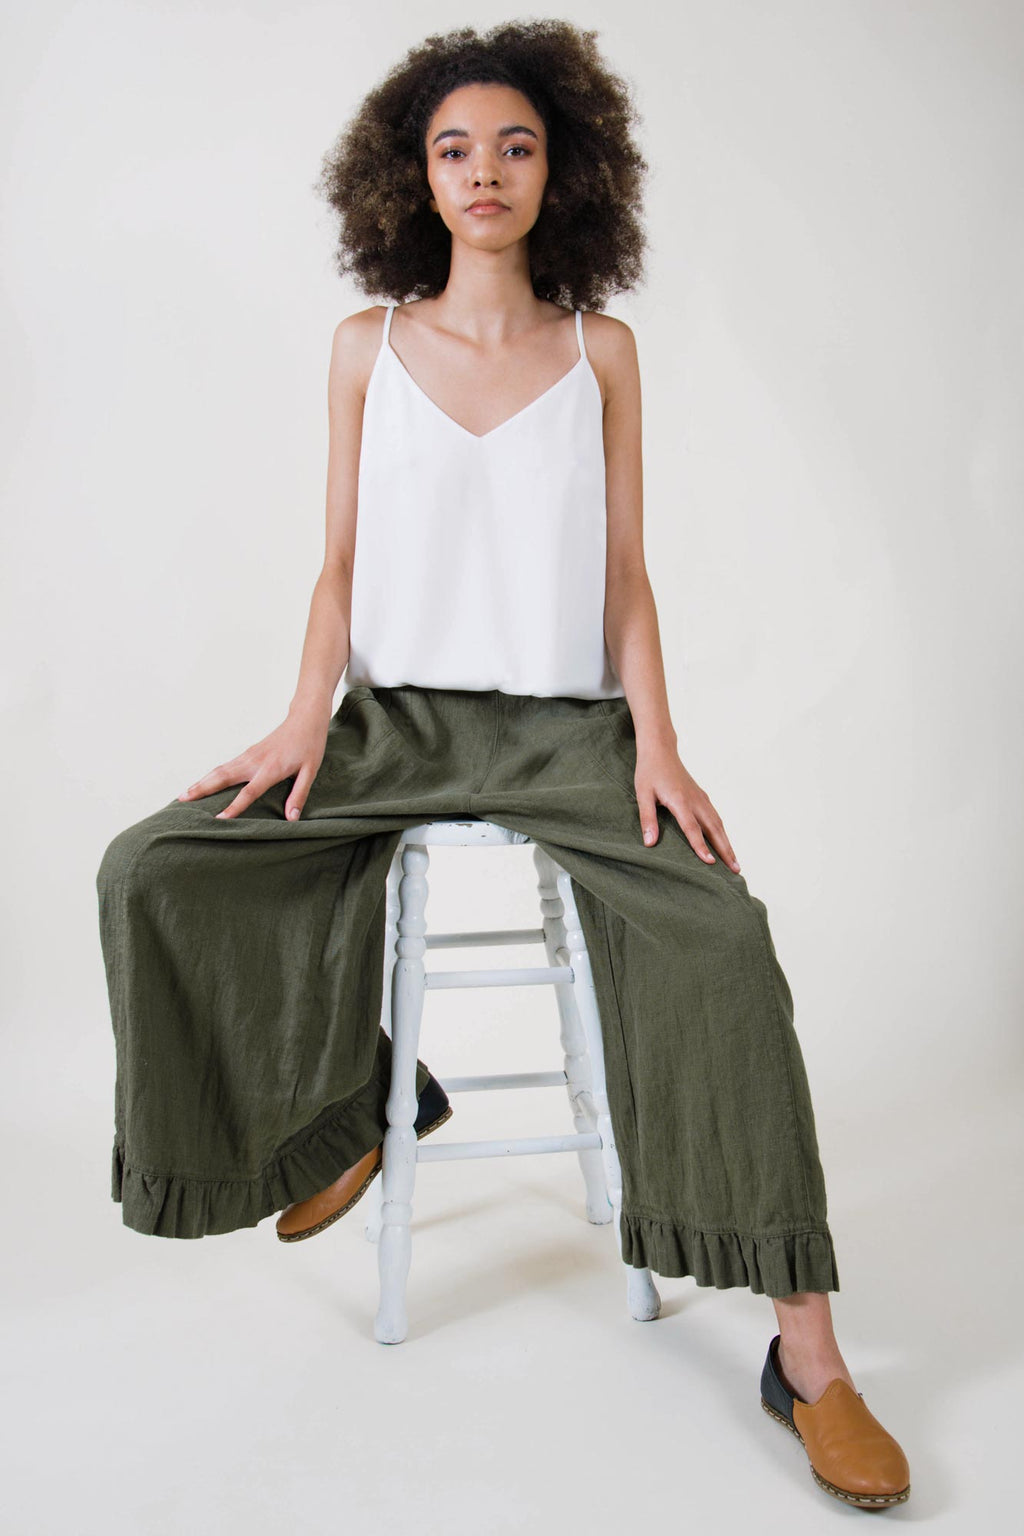 Wide Leg Linen Pants with Ruffle Bottom - Garbo Pant in Linen, USA